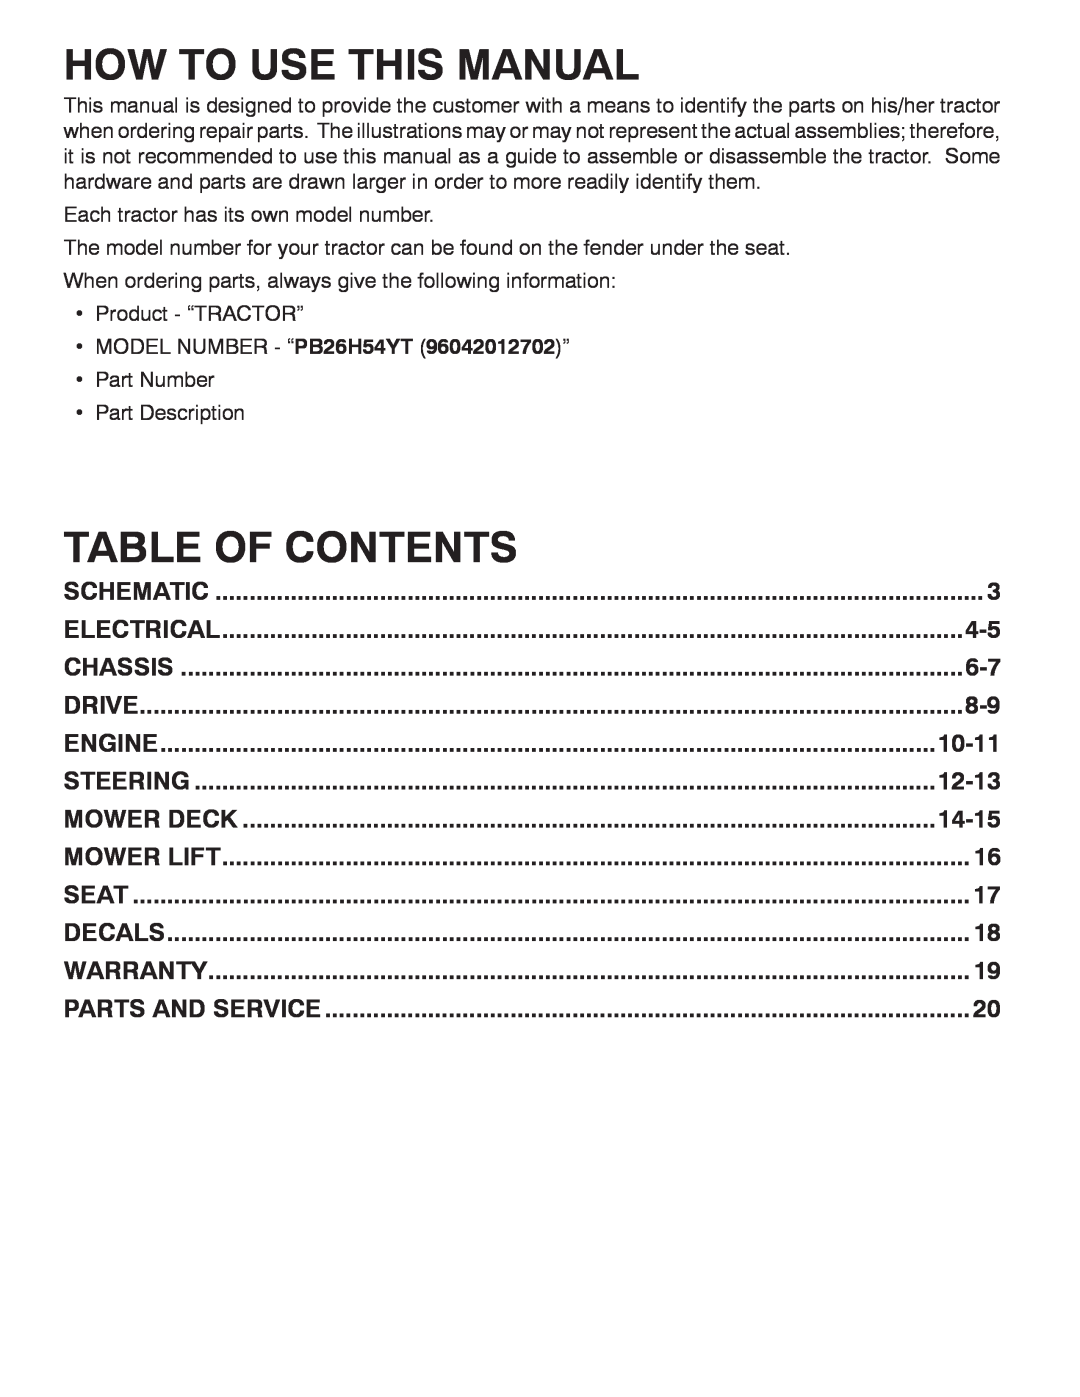 Poulan PB26H5YT manual How To Use This Manual, Table Of Contents, Chassis, Drive, Engine, Steering, Mower Deck 